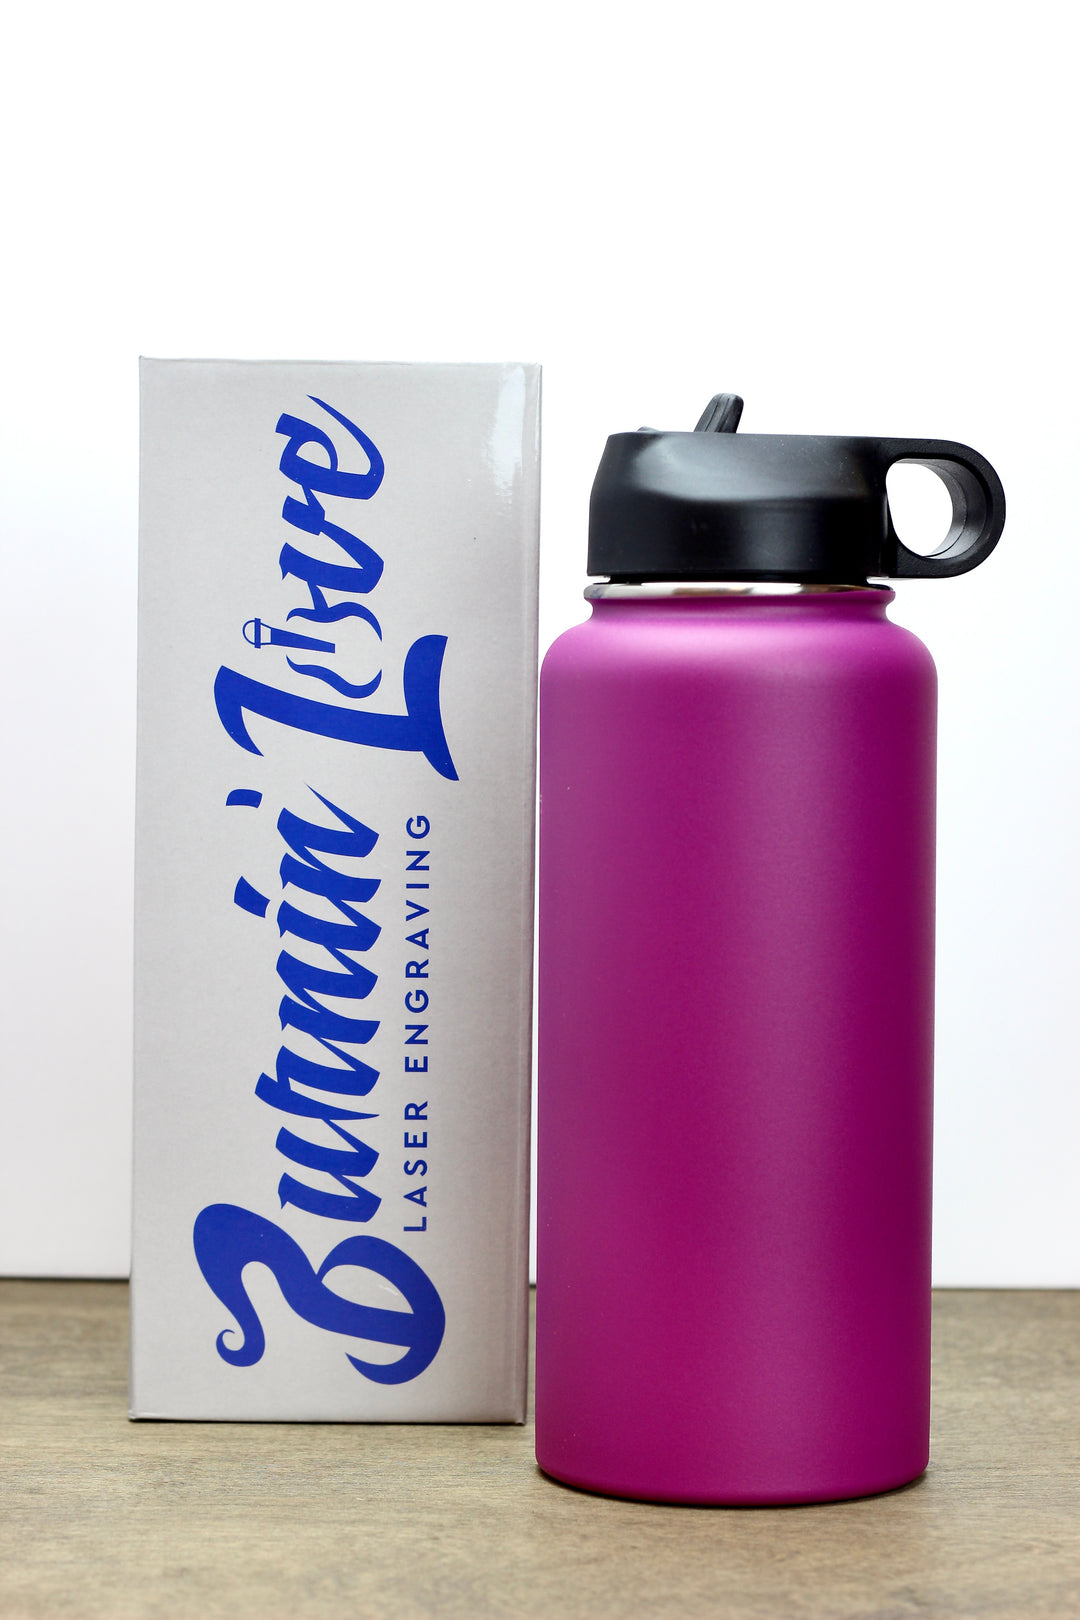 Hydro Flask 32 oz in Lilac with matching boot and lid from ! : r/ Hydroflask